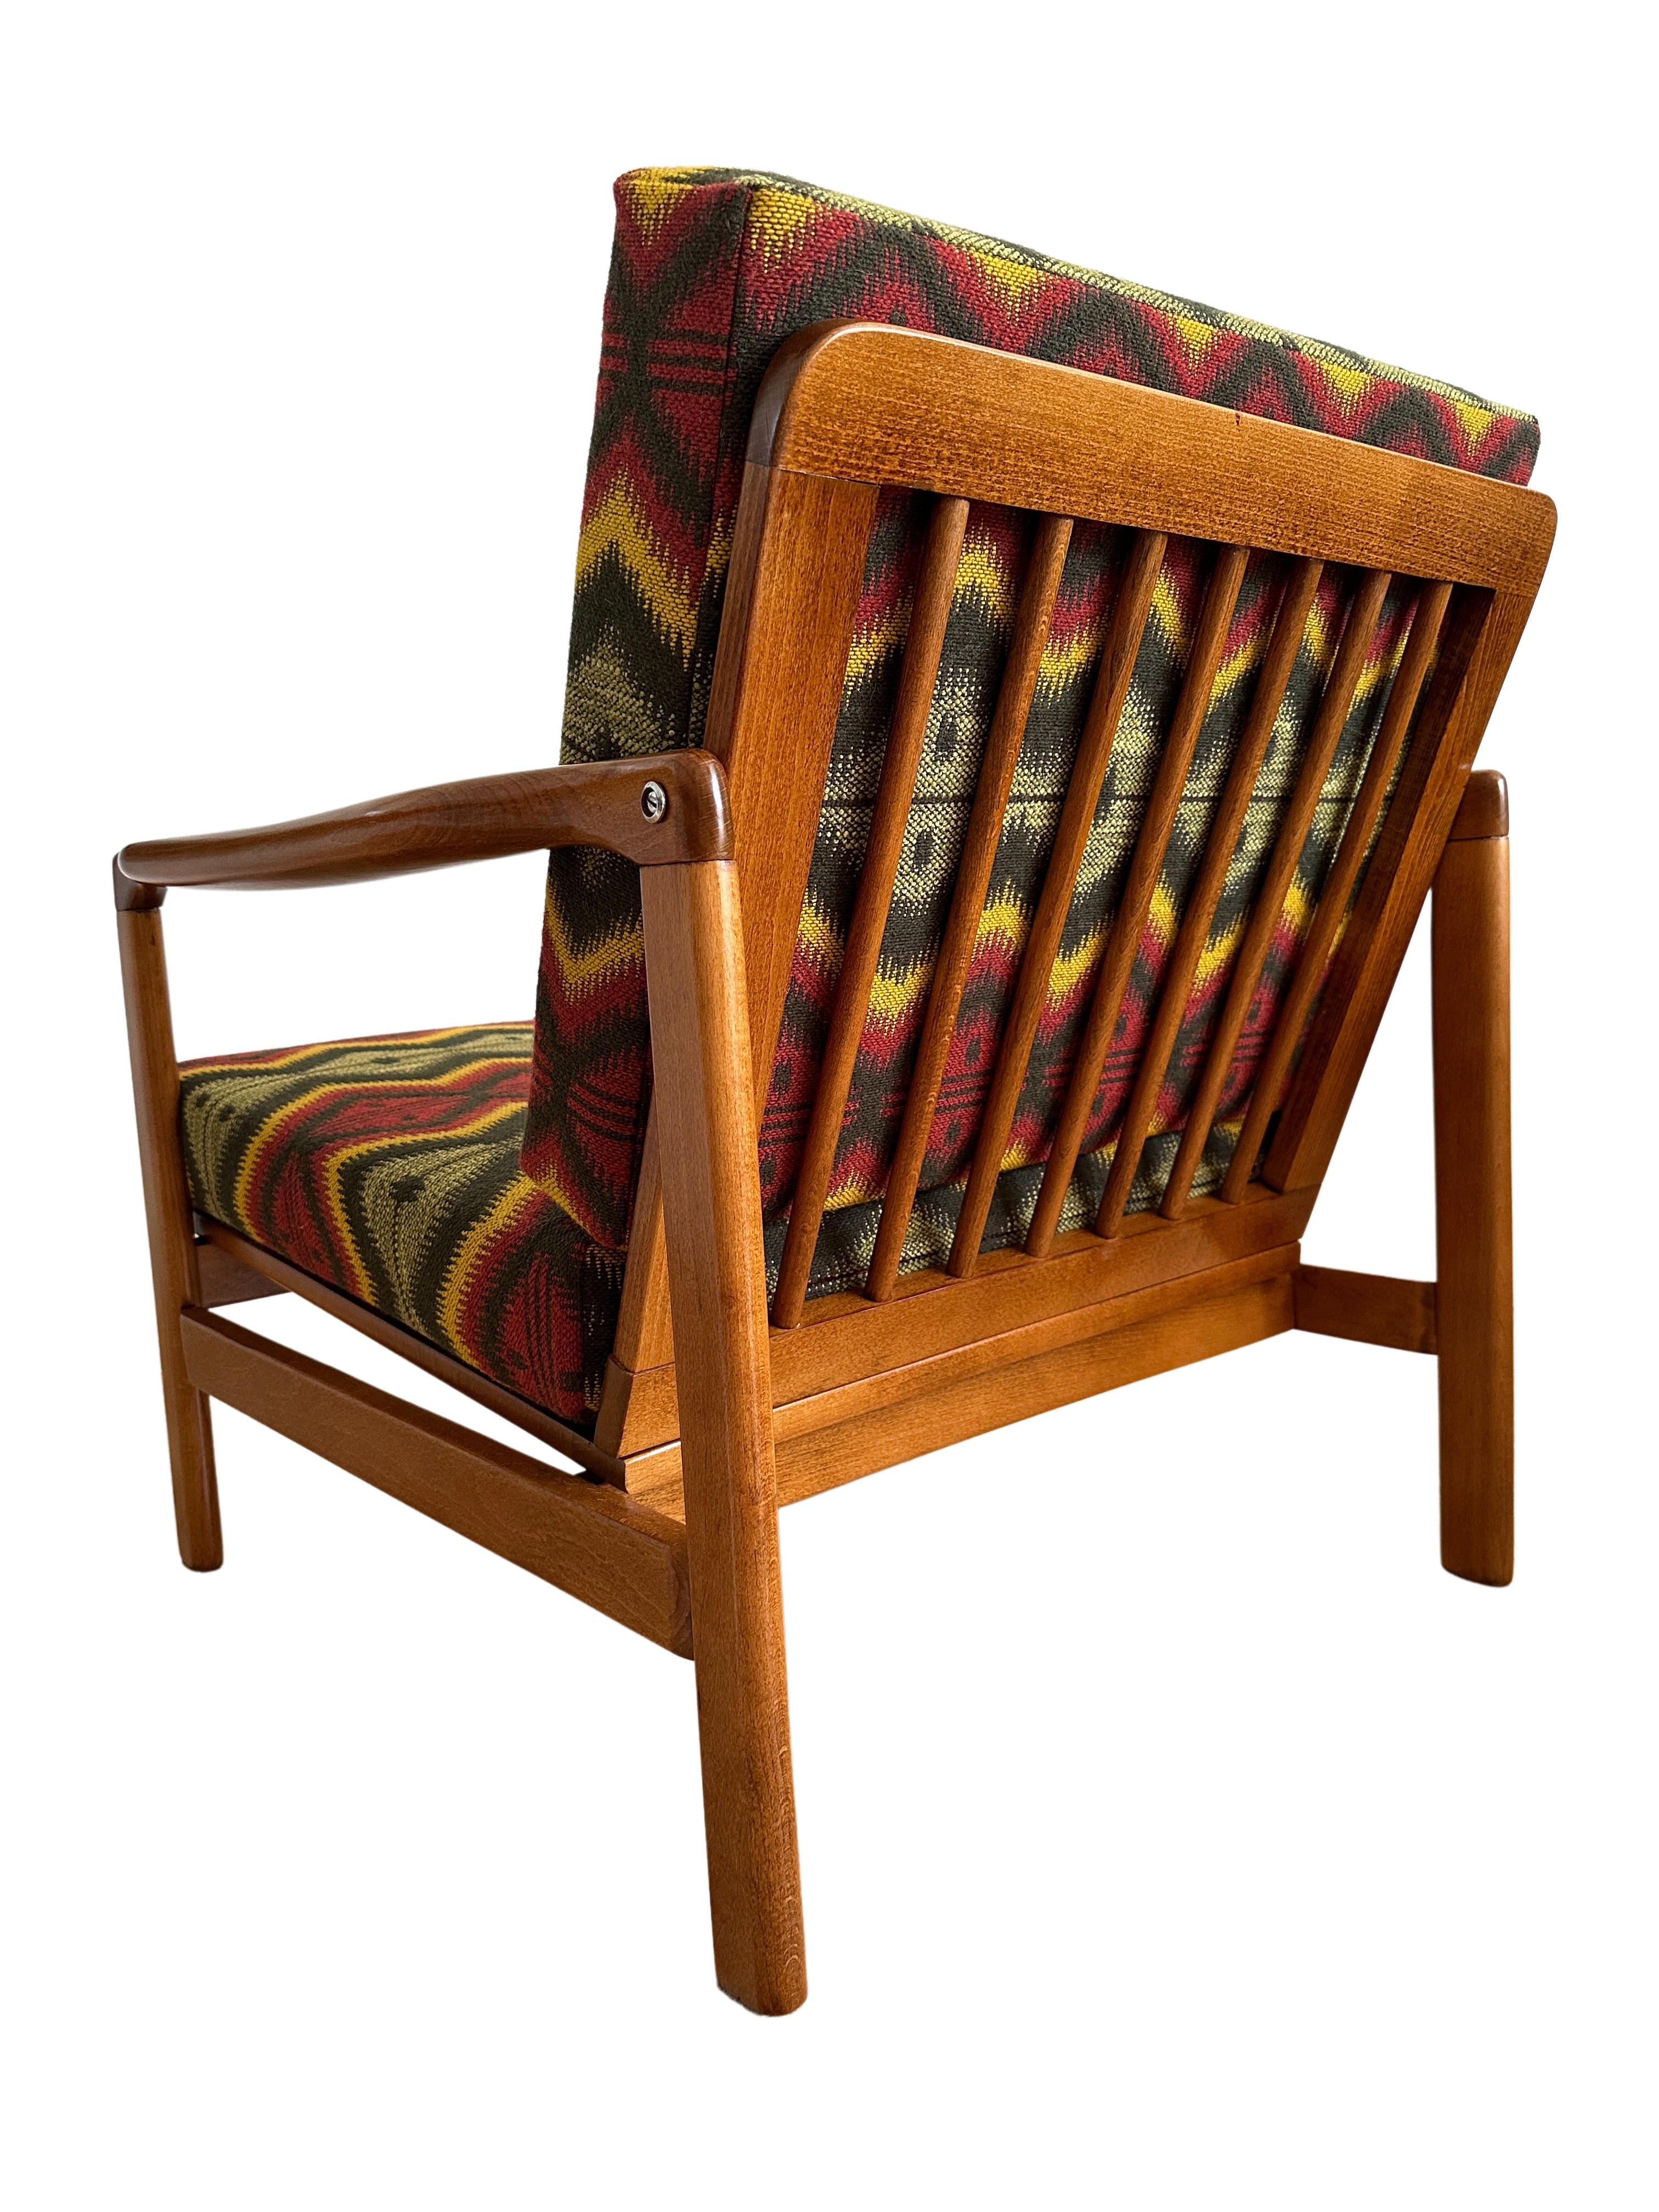 Fabric Midcentury Armchair by Zenon Bączyk, Mind the Gap Upholstery, Europe, 1960s For Sale